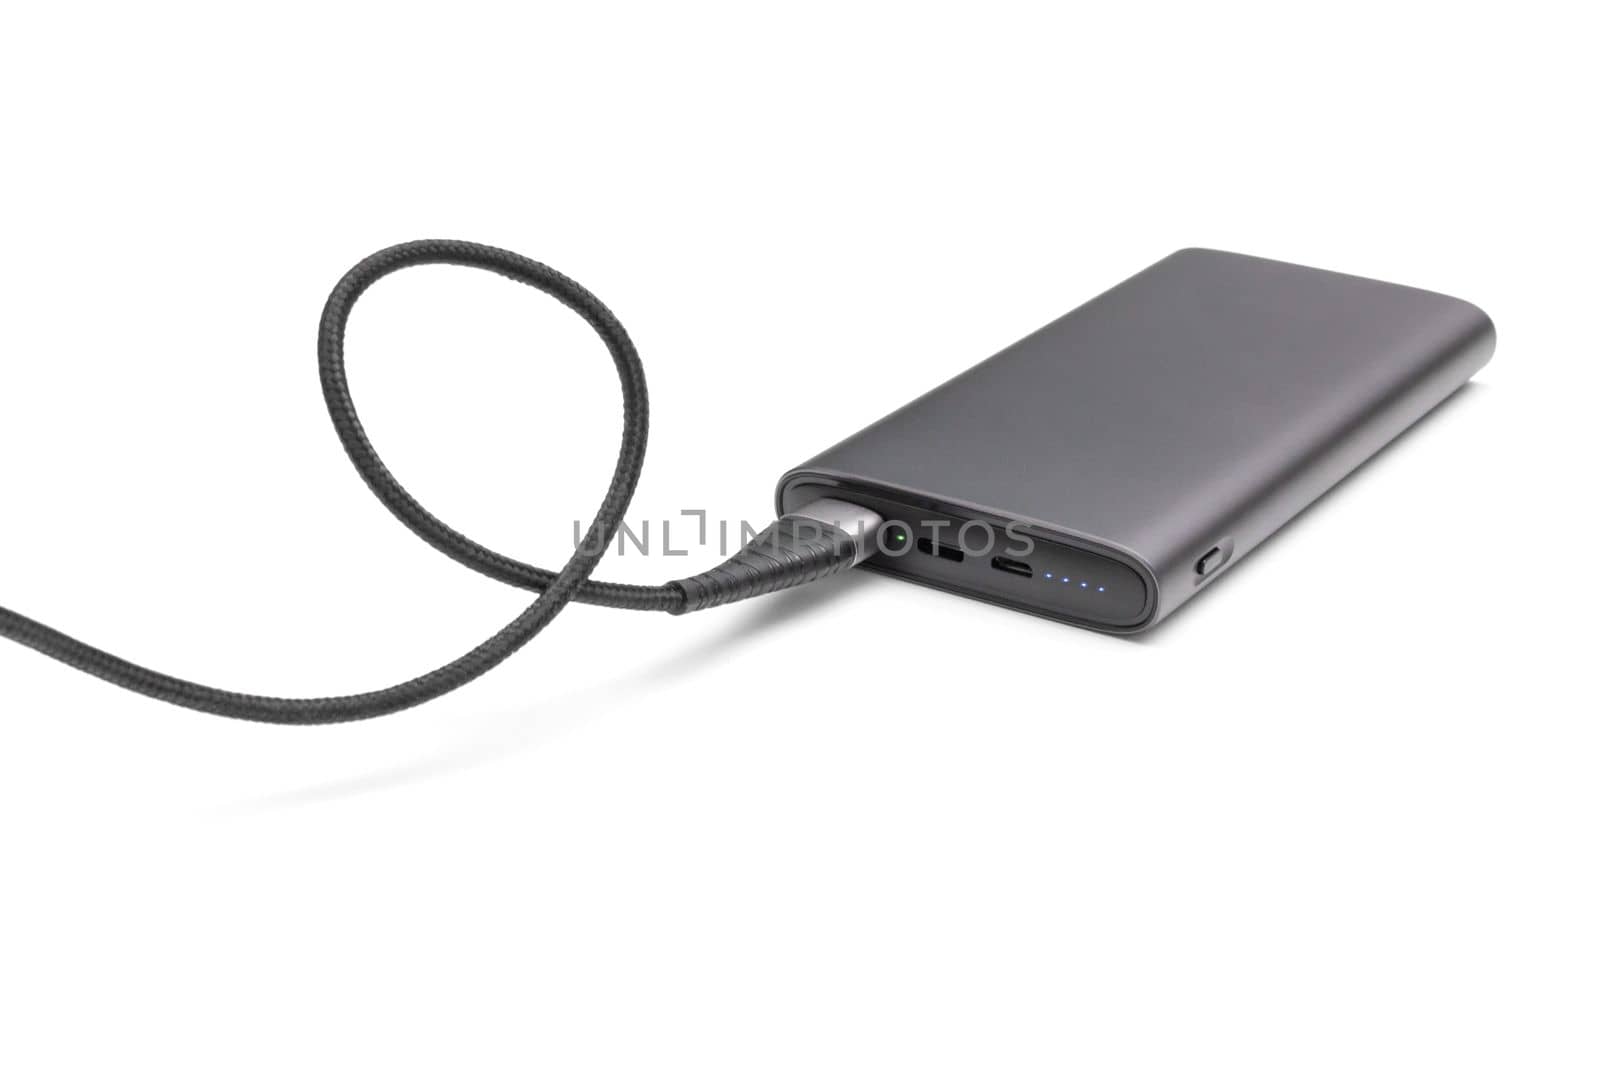 Powerbank new, powerful dark color with two usb inputs on a white background by clusterx